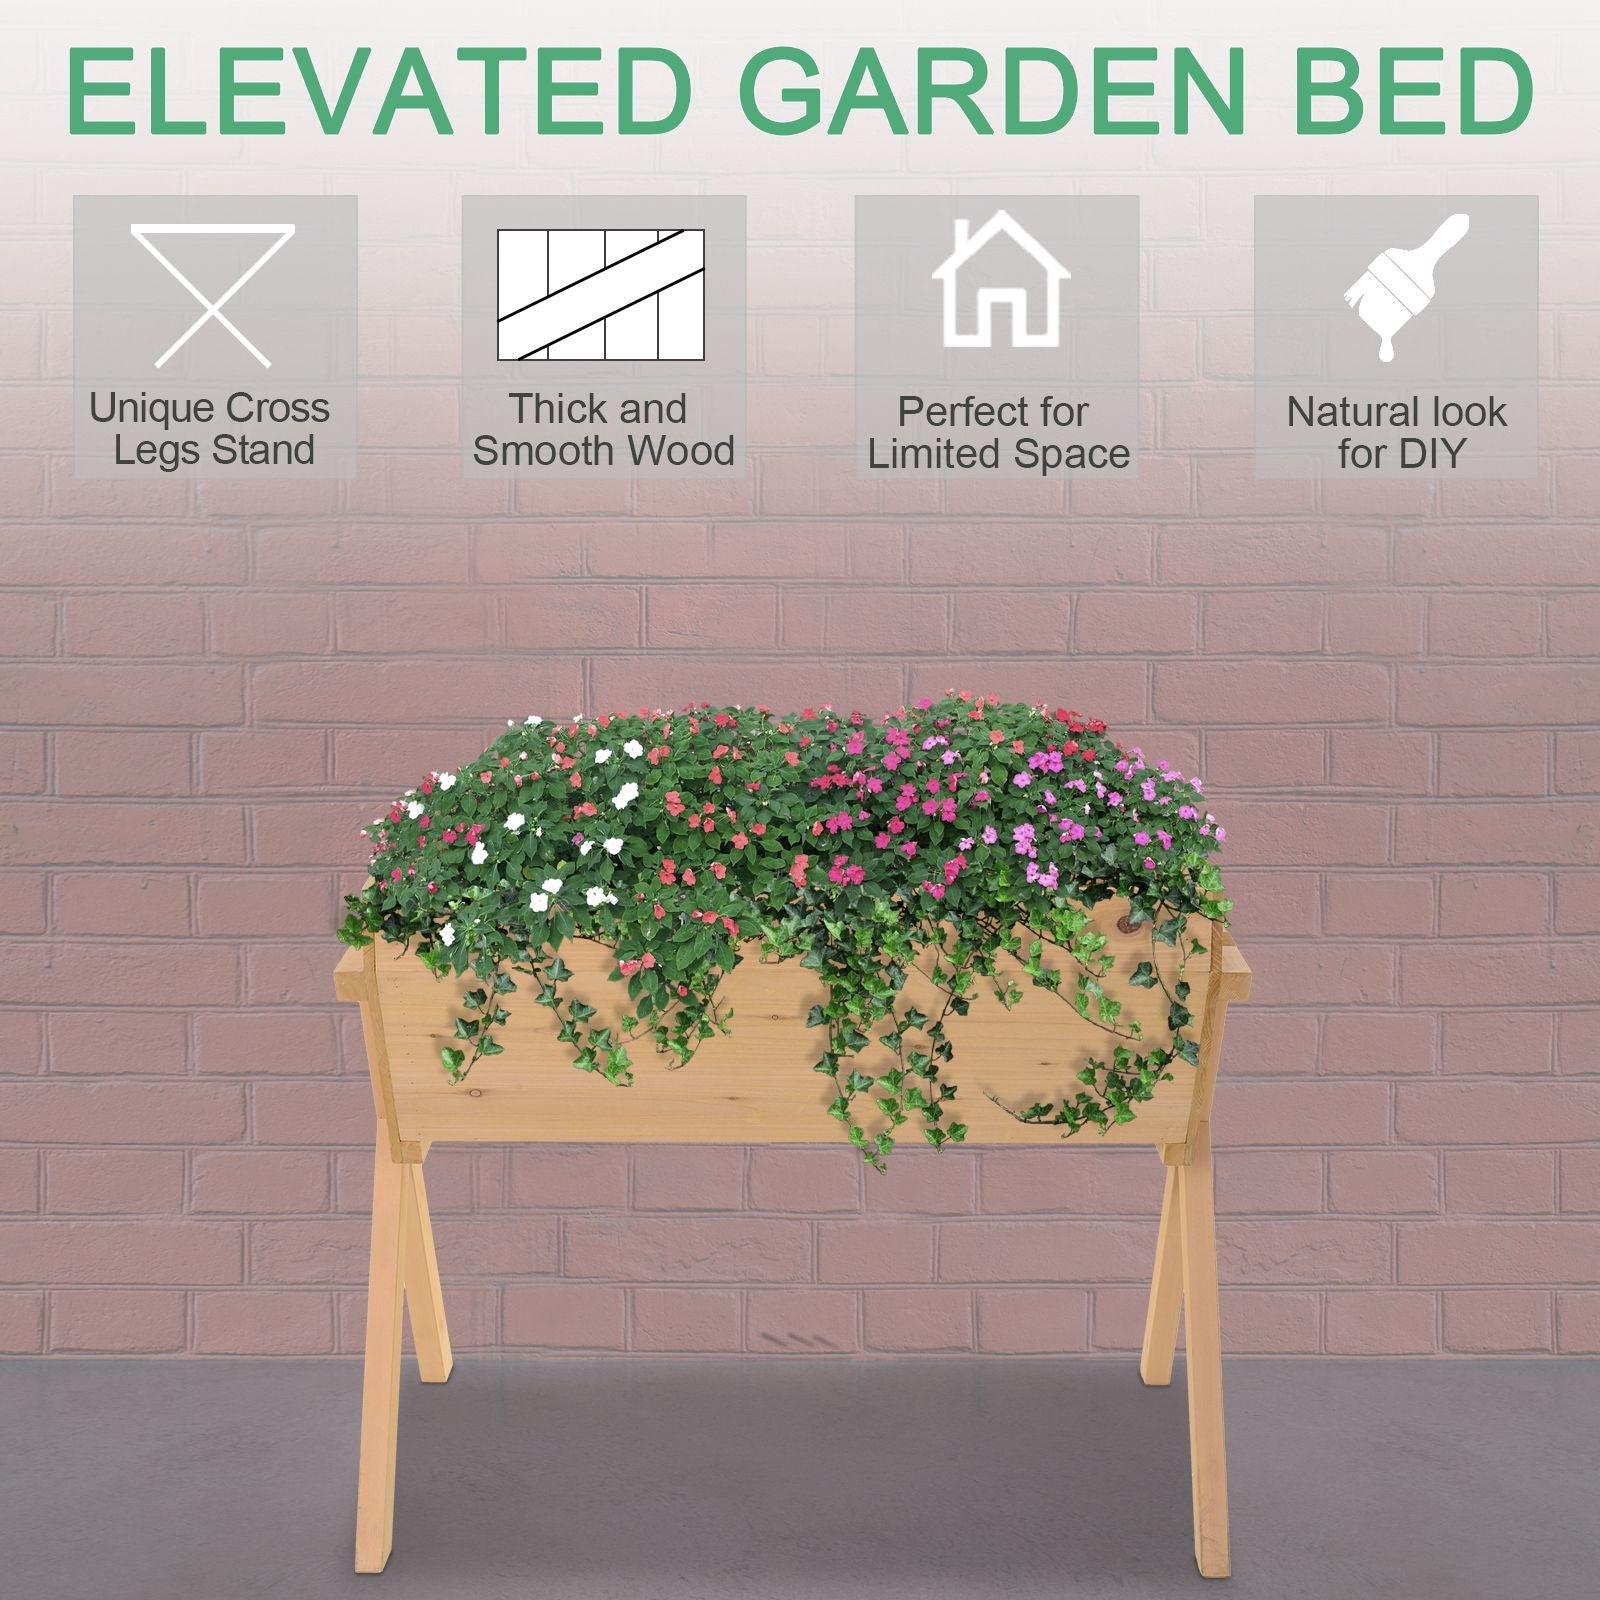 39'' x 28'' Raised Garden Bed with Legs, Elevated Wooden Planter Box with Bed Liner for Vegetables, Flowers Herbs, Backyard Patio Balcony Use at Gallery Canada